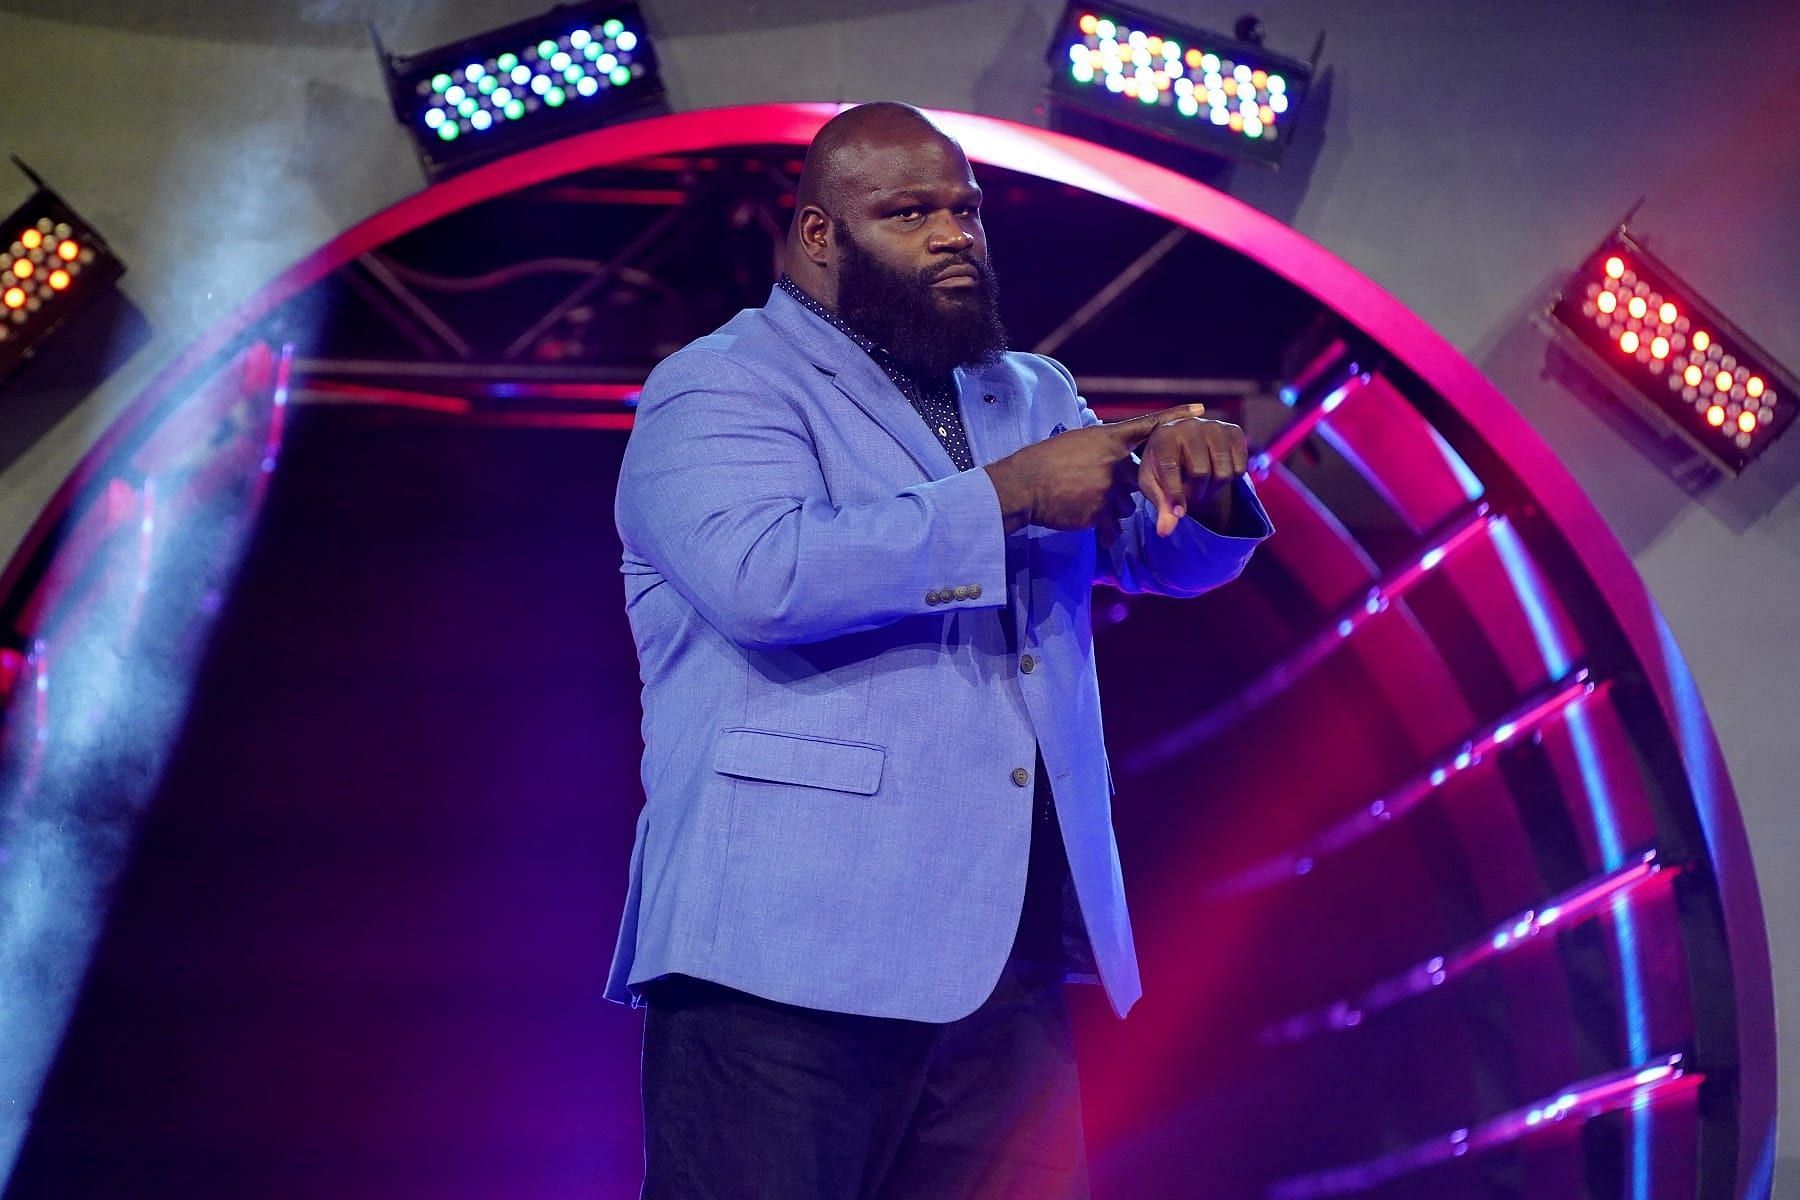 Mark Henry is currently signed with All Elite Wrestling